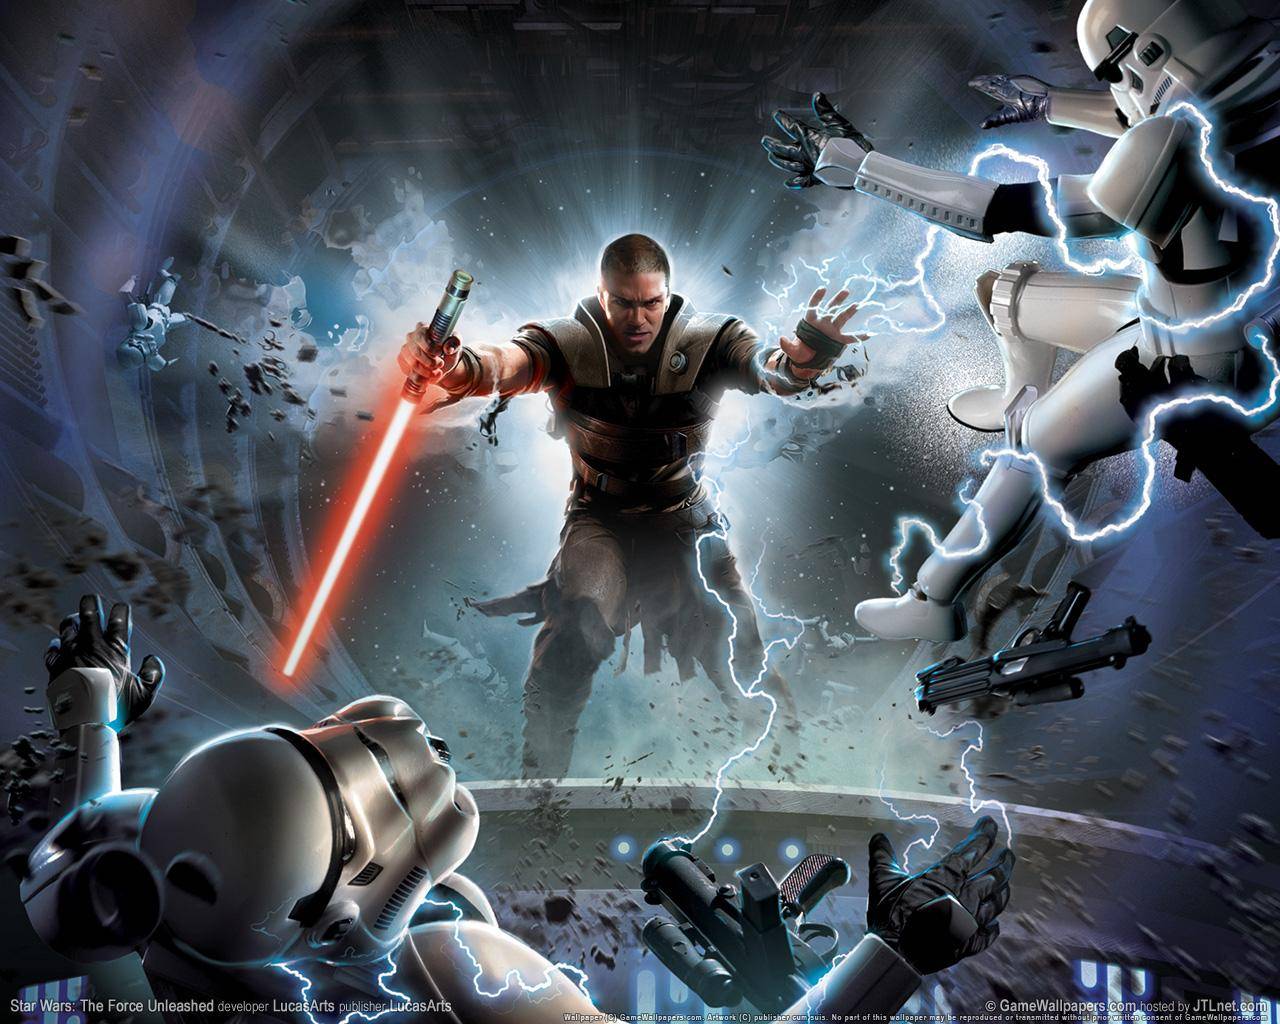 save-games-star-wars-the-force-unleashed-use-file-empire-at-war-mod-db